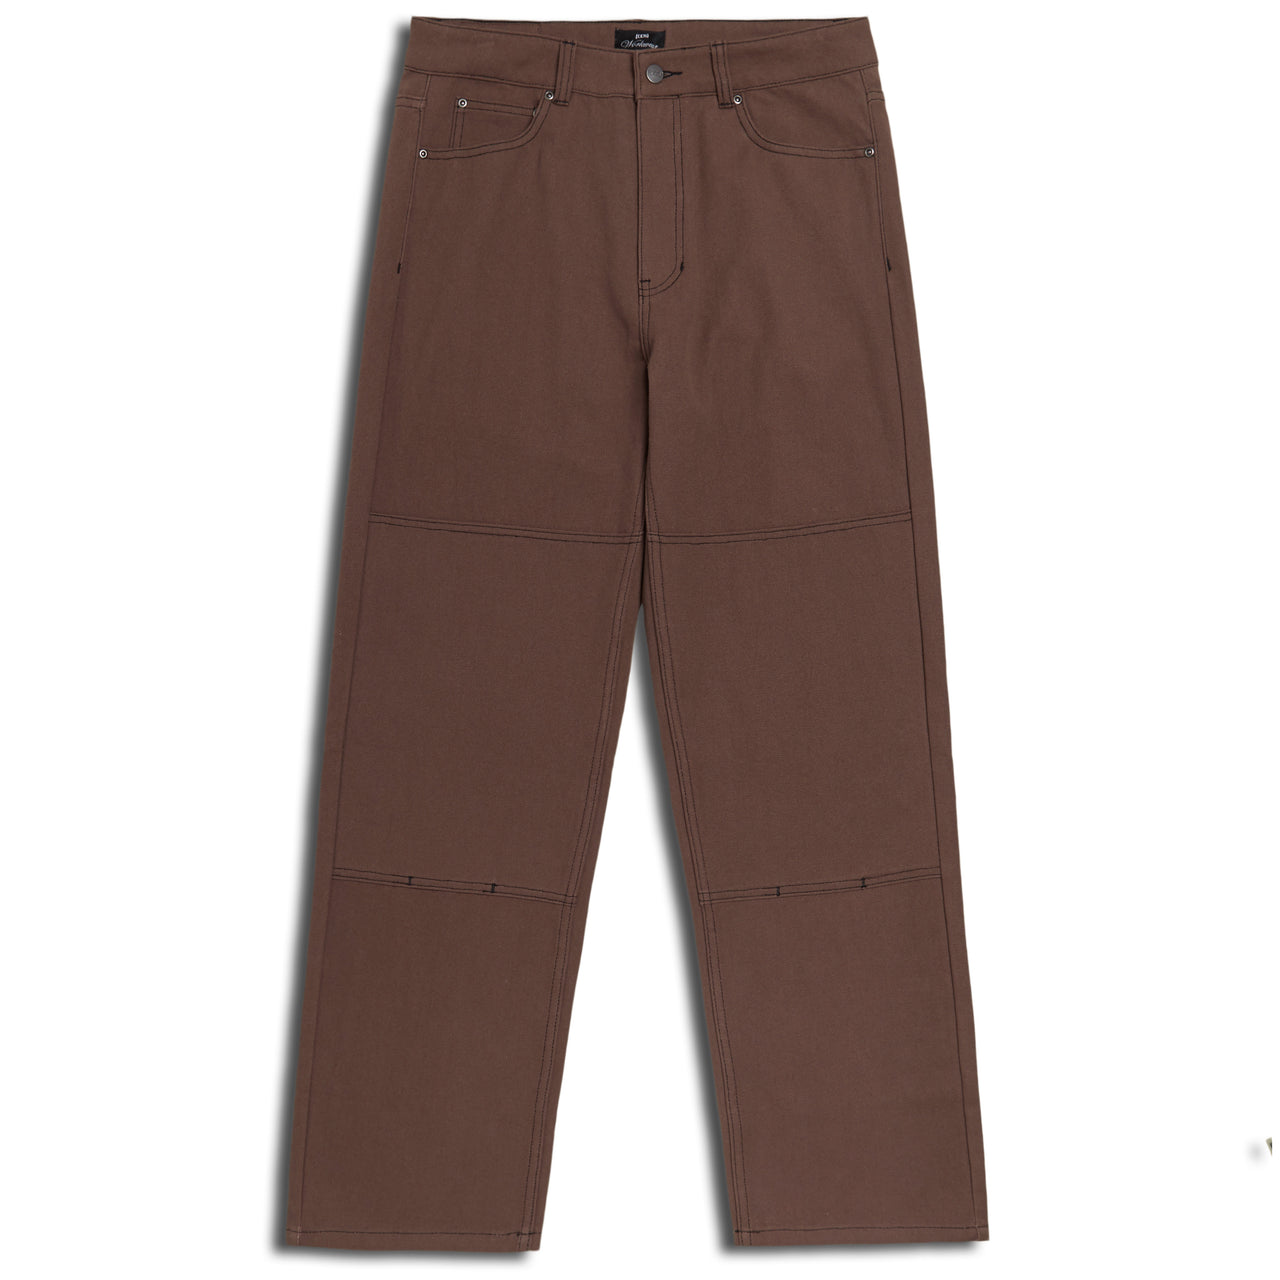 CCS Double Knee Original Relaxed Canvas Pants - Brown/Black image 3